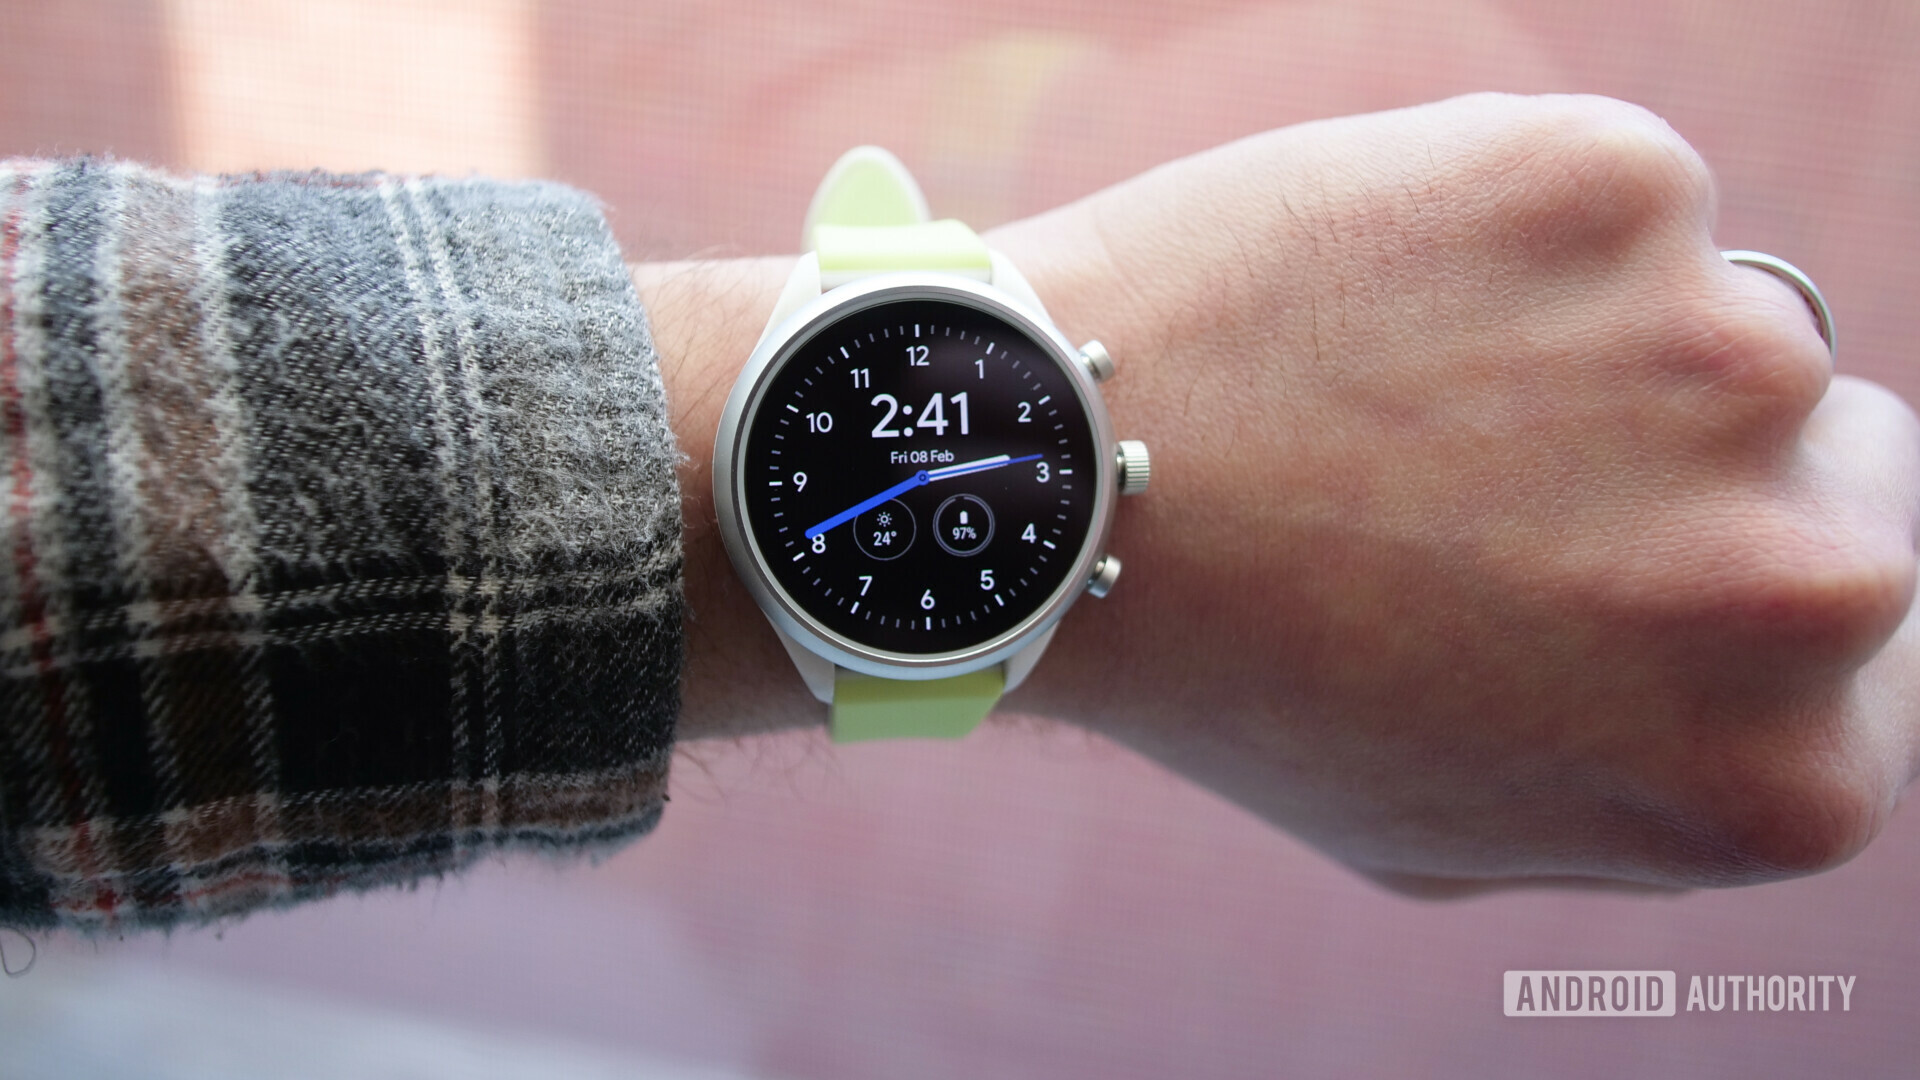 Photo of a Fossil Sport in neon yellow color with a watch face oled screen on wrist